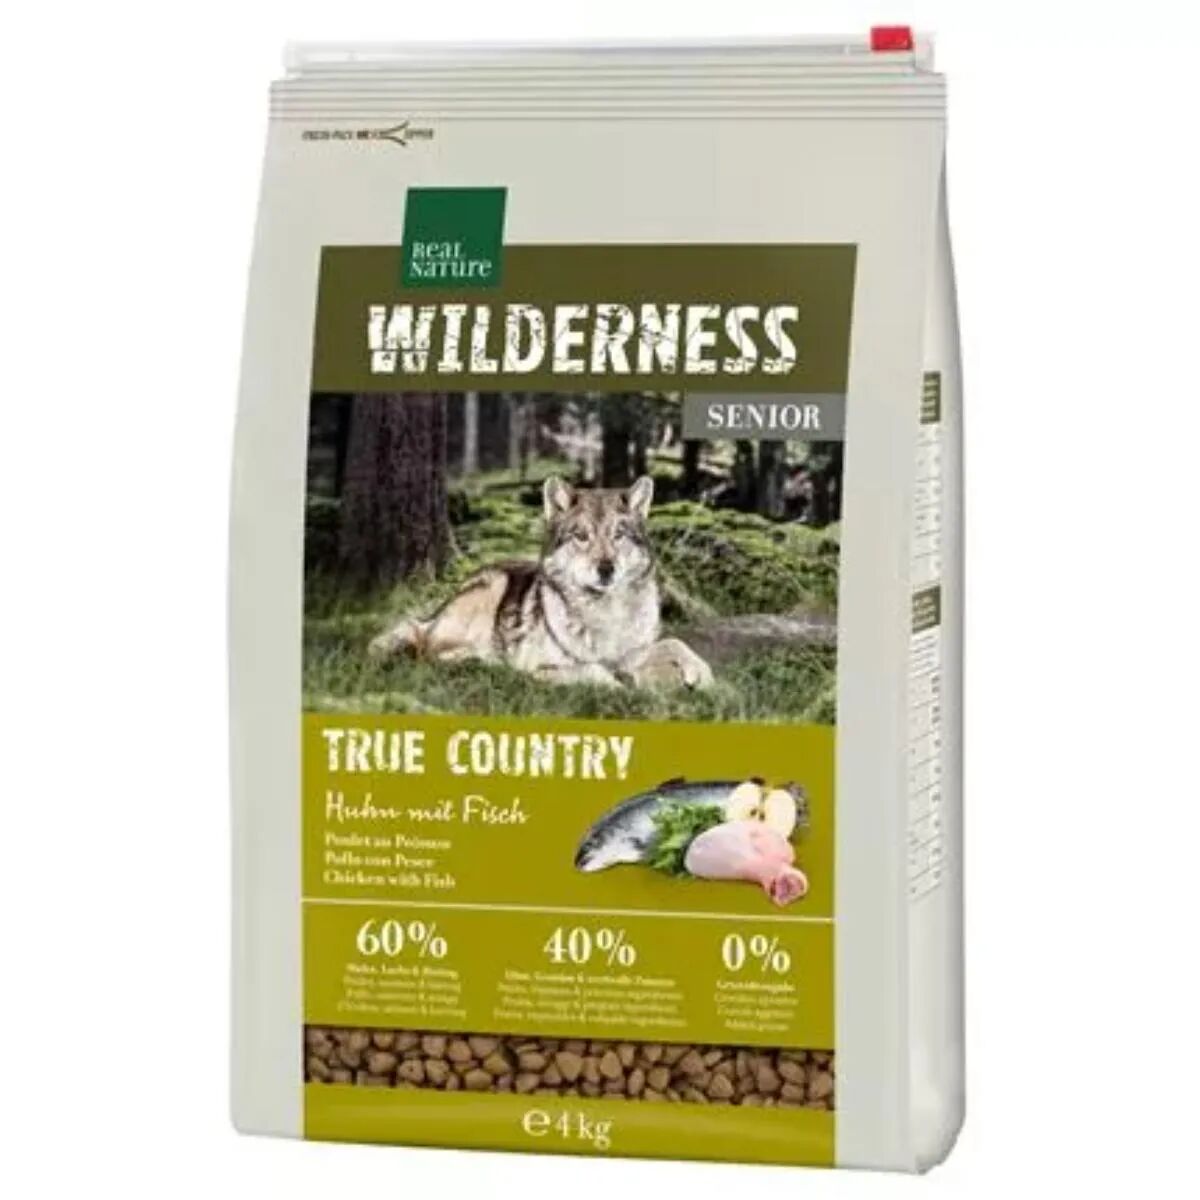 REAL NATURE Wilderness  Cane Senior True Country 4KG